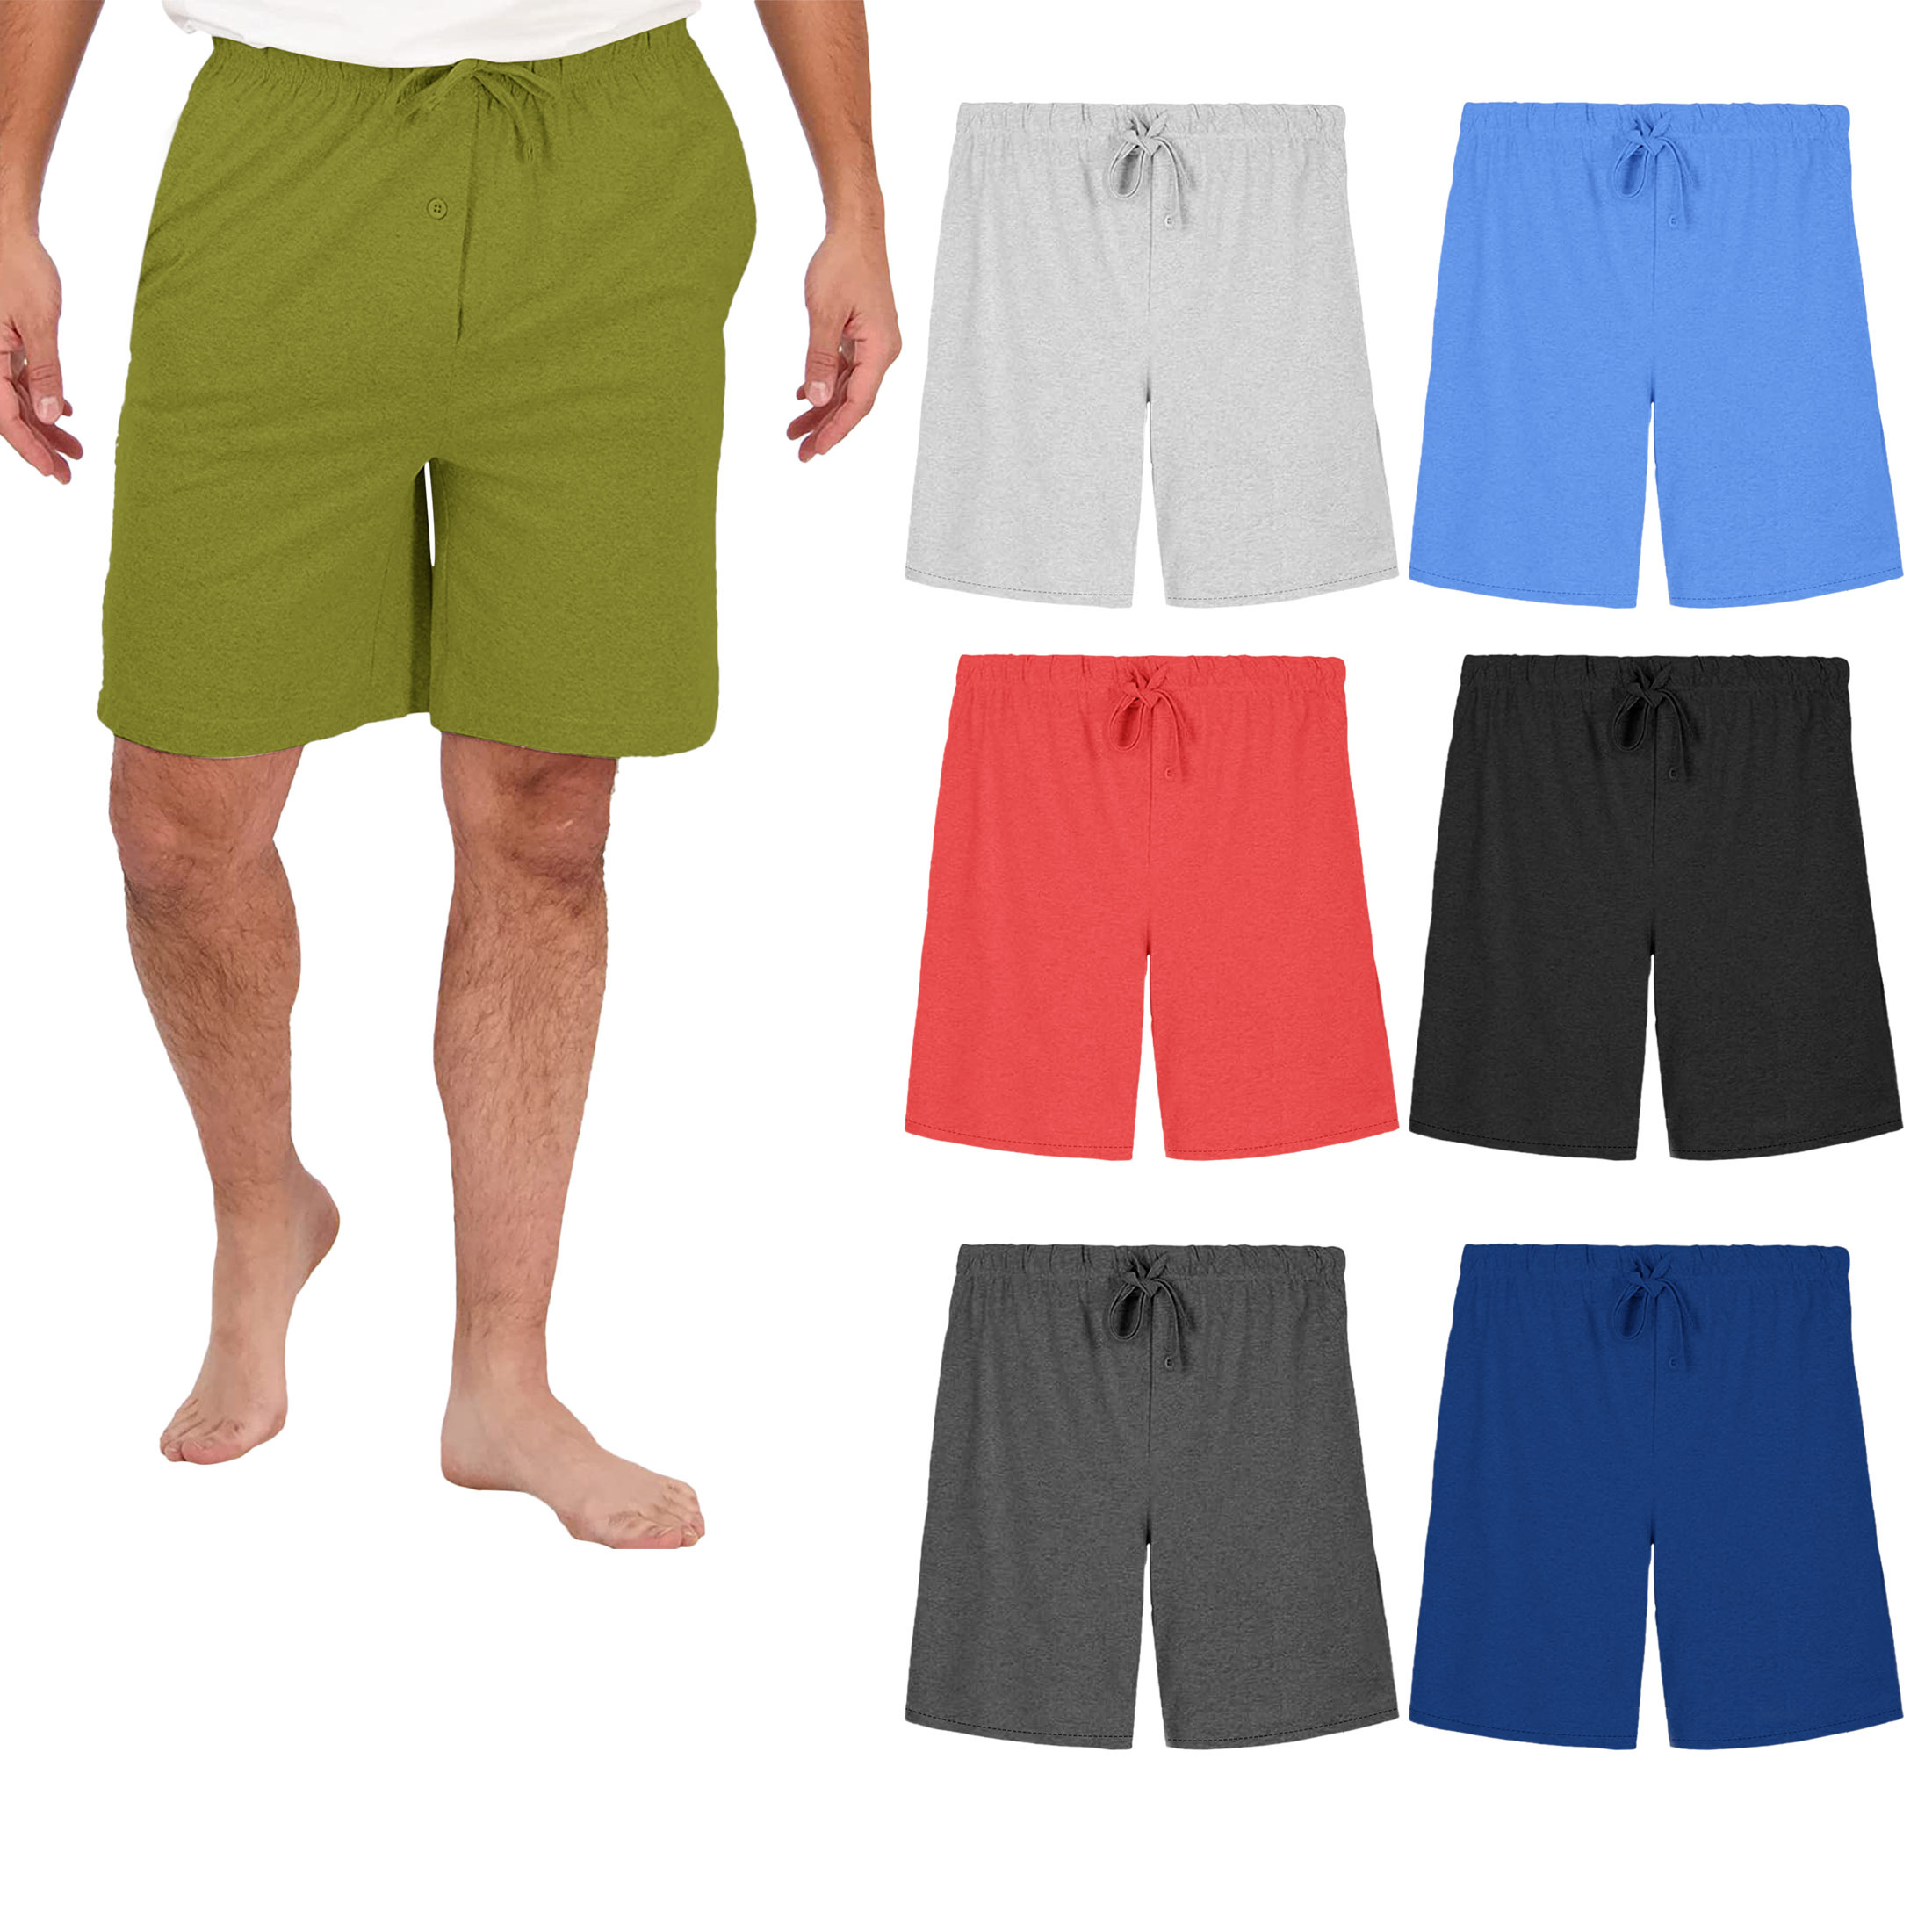 4-Pack Men's Solid Jersey-Knit Tech Shorts Soft Casual Athletic Relaxed Fit Lounge Performance Bottom Pants - S